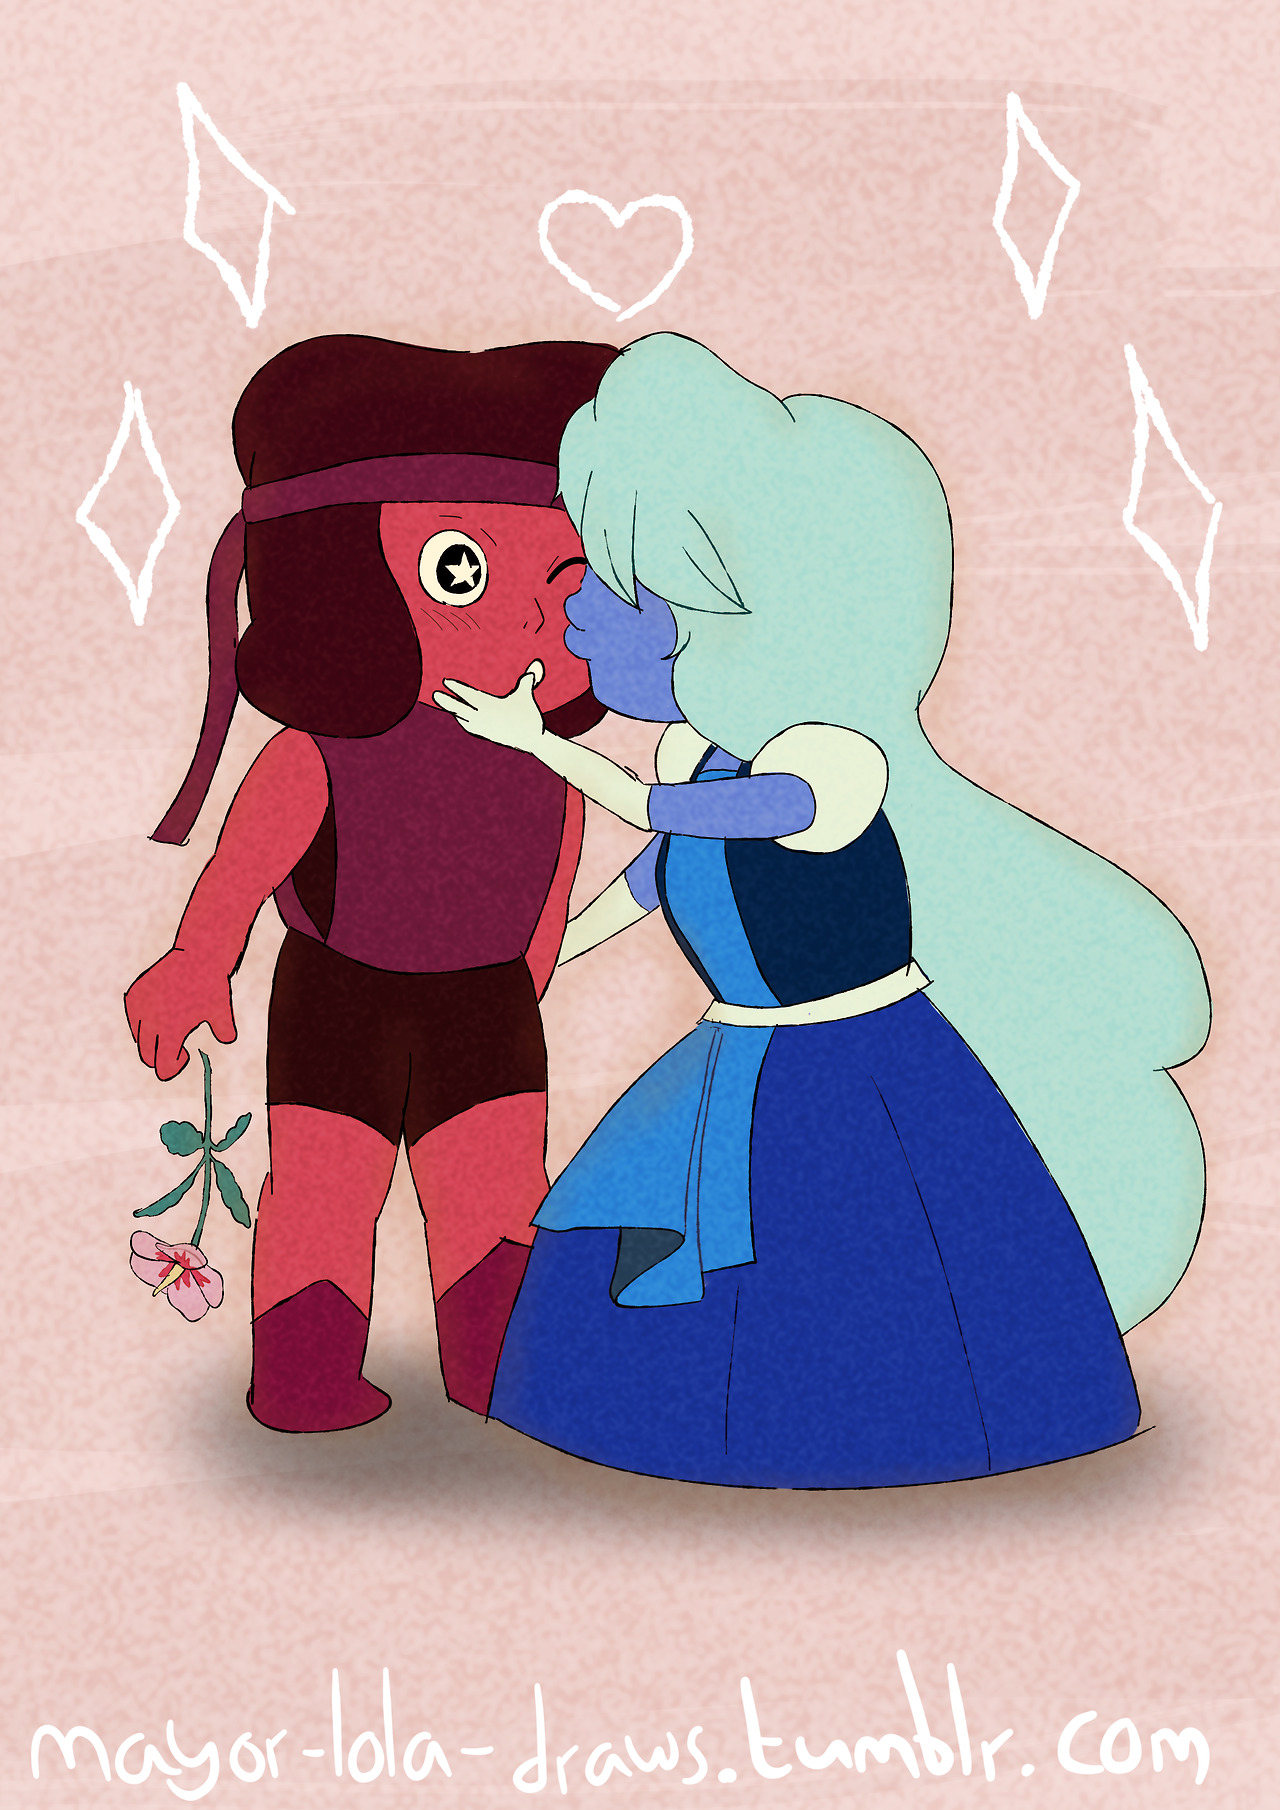 A quick doodle of my favourite gal pals! Remember to always kiss your Ruby at least 1 (one) time per day folks!